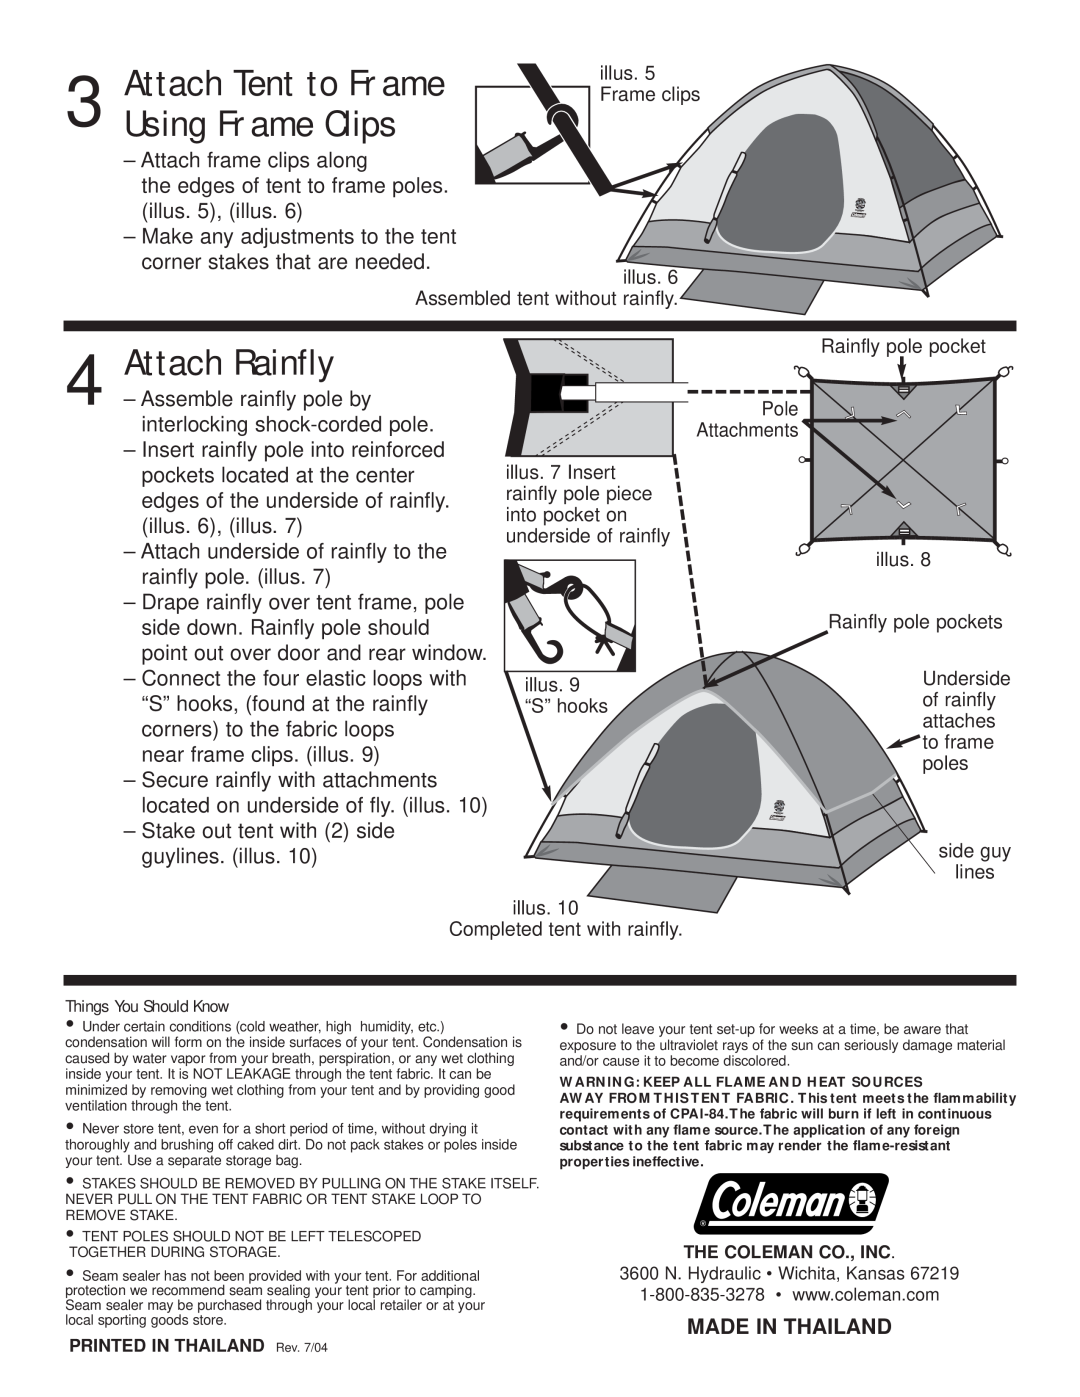 Coleman 9180-309, 9180-307 manual Attach Tent to Frame, Using Frame Clips, Attach Rainfly, Made In Thailand 